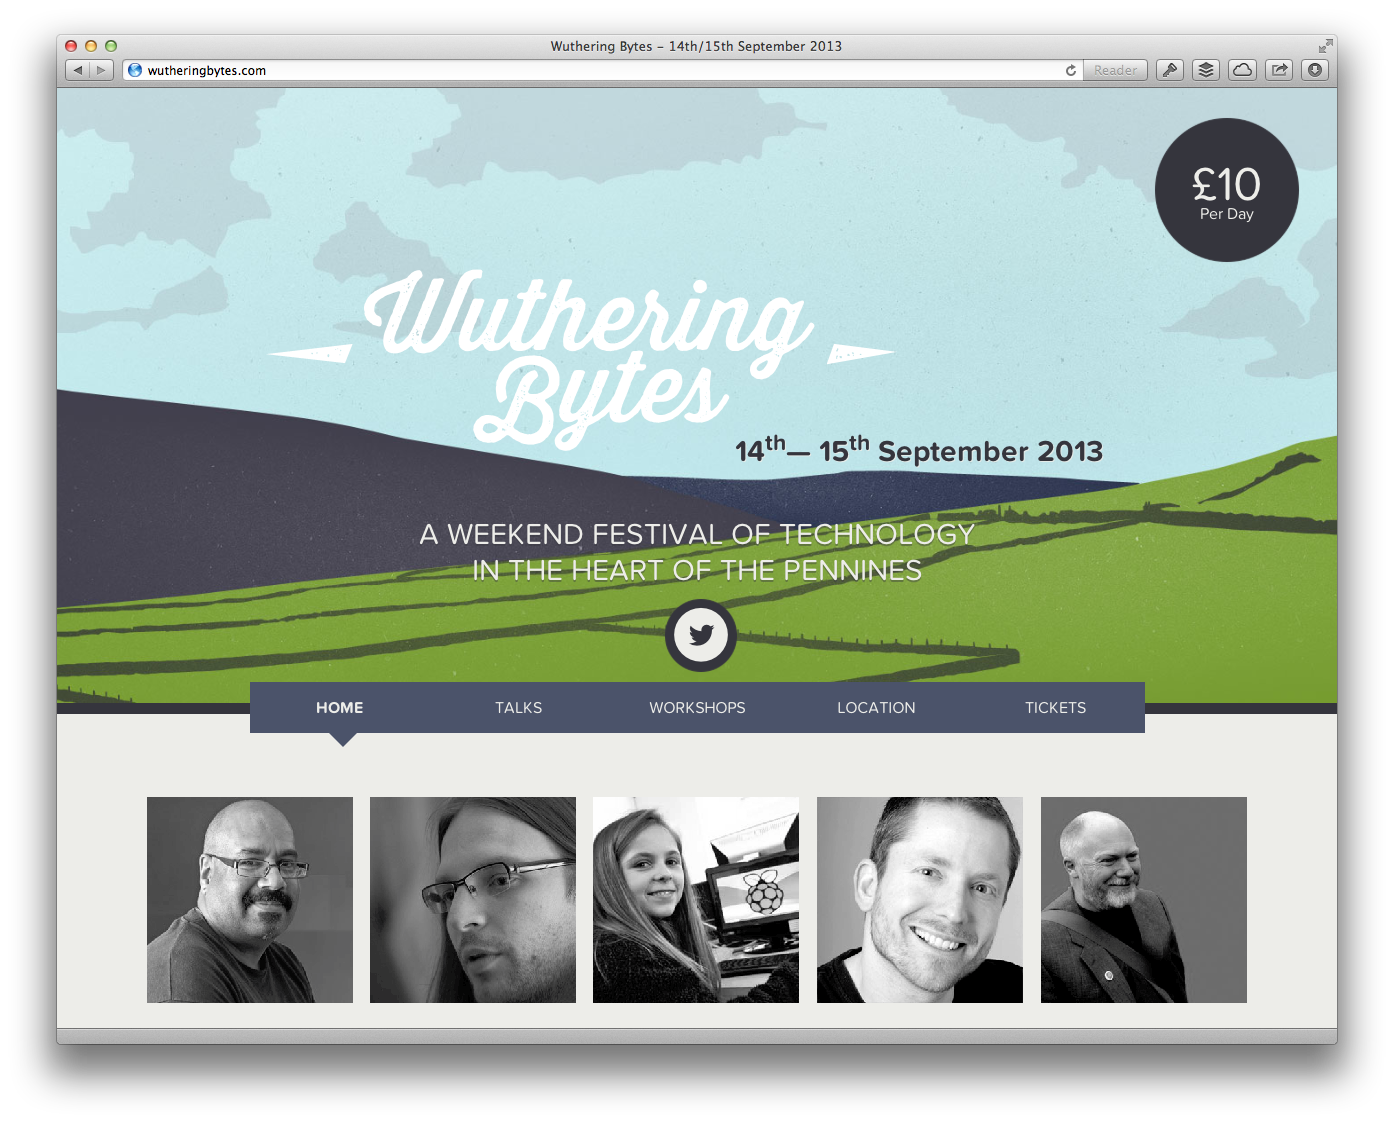 Screenshot of the Wuthering Bytes conference that takes place 14-15 September 2013 and costs £10, showing portraits of some of the speakers including Mike Little, Blaine Cook, Amy Mather, Aral Balkan, and Paul Downey.